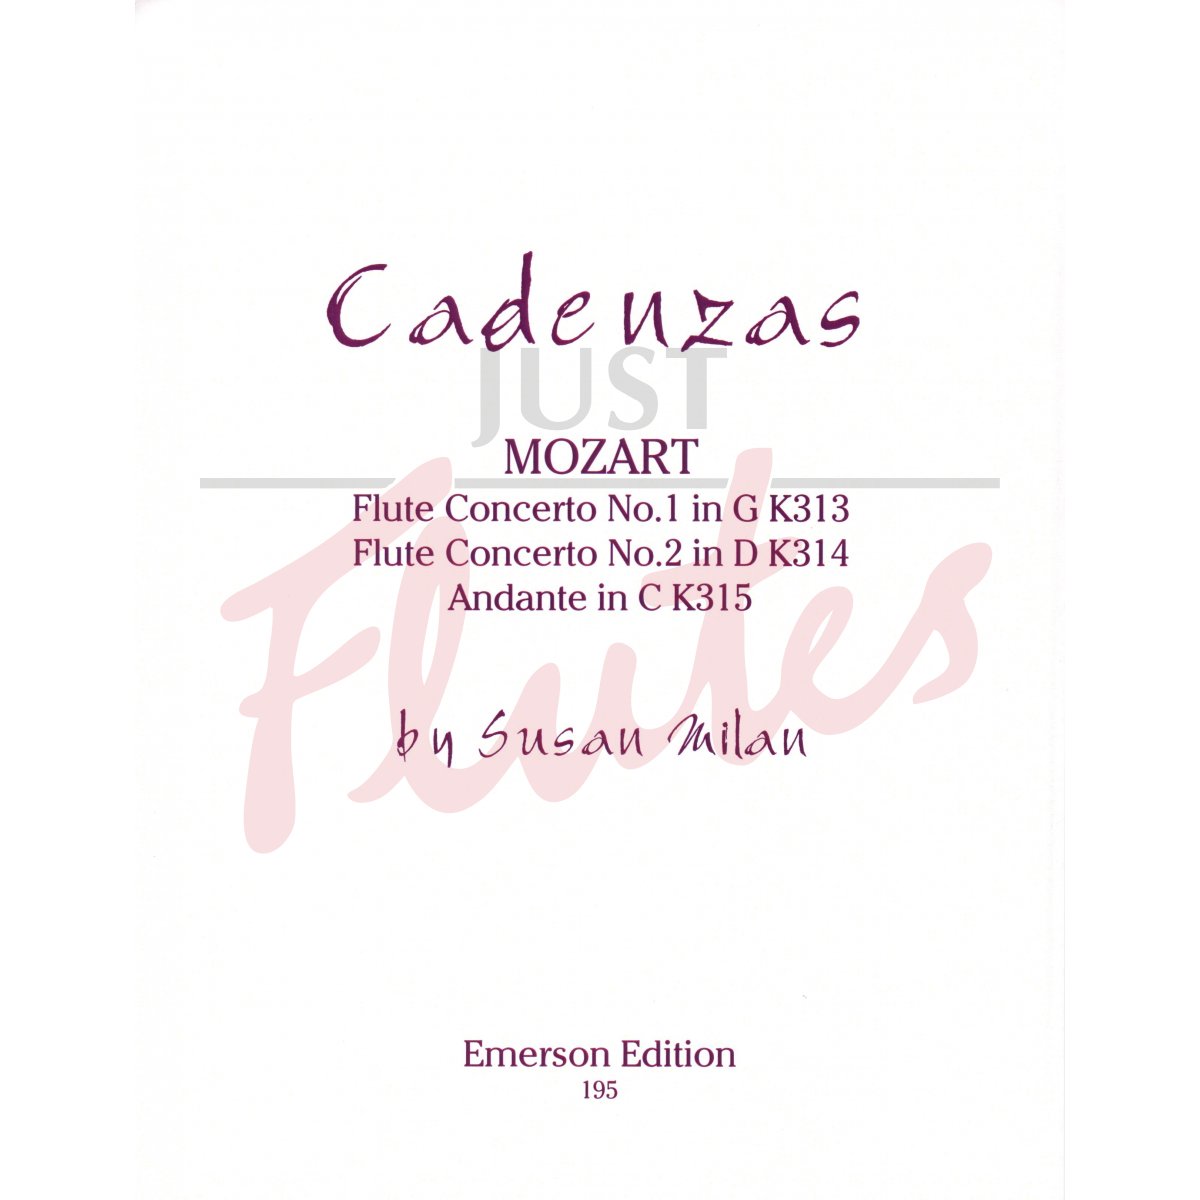 Cadenzas for Flute Concertos No.1 in G K313 and No.2 in D K314, and Andante in C K315